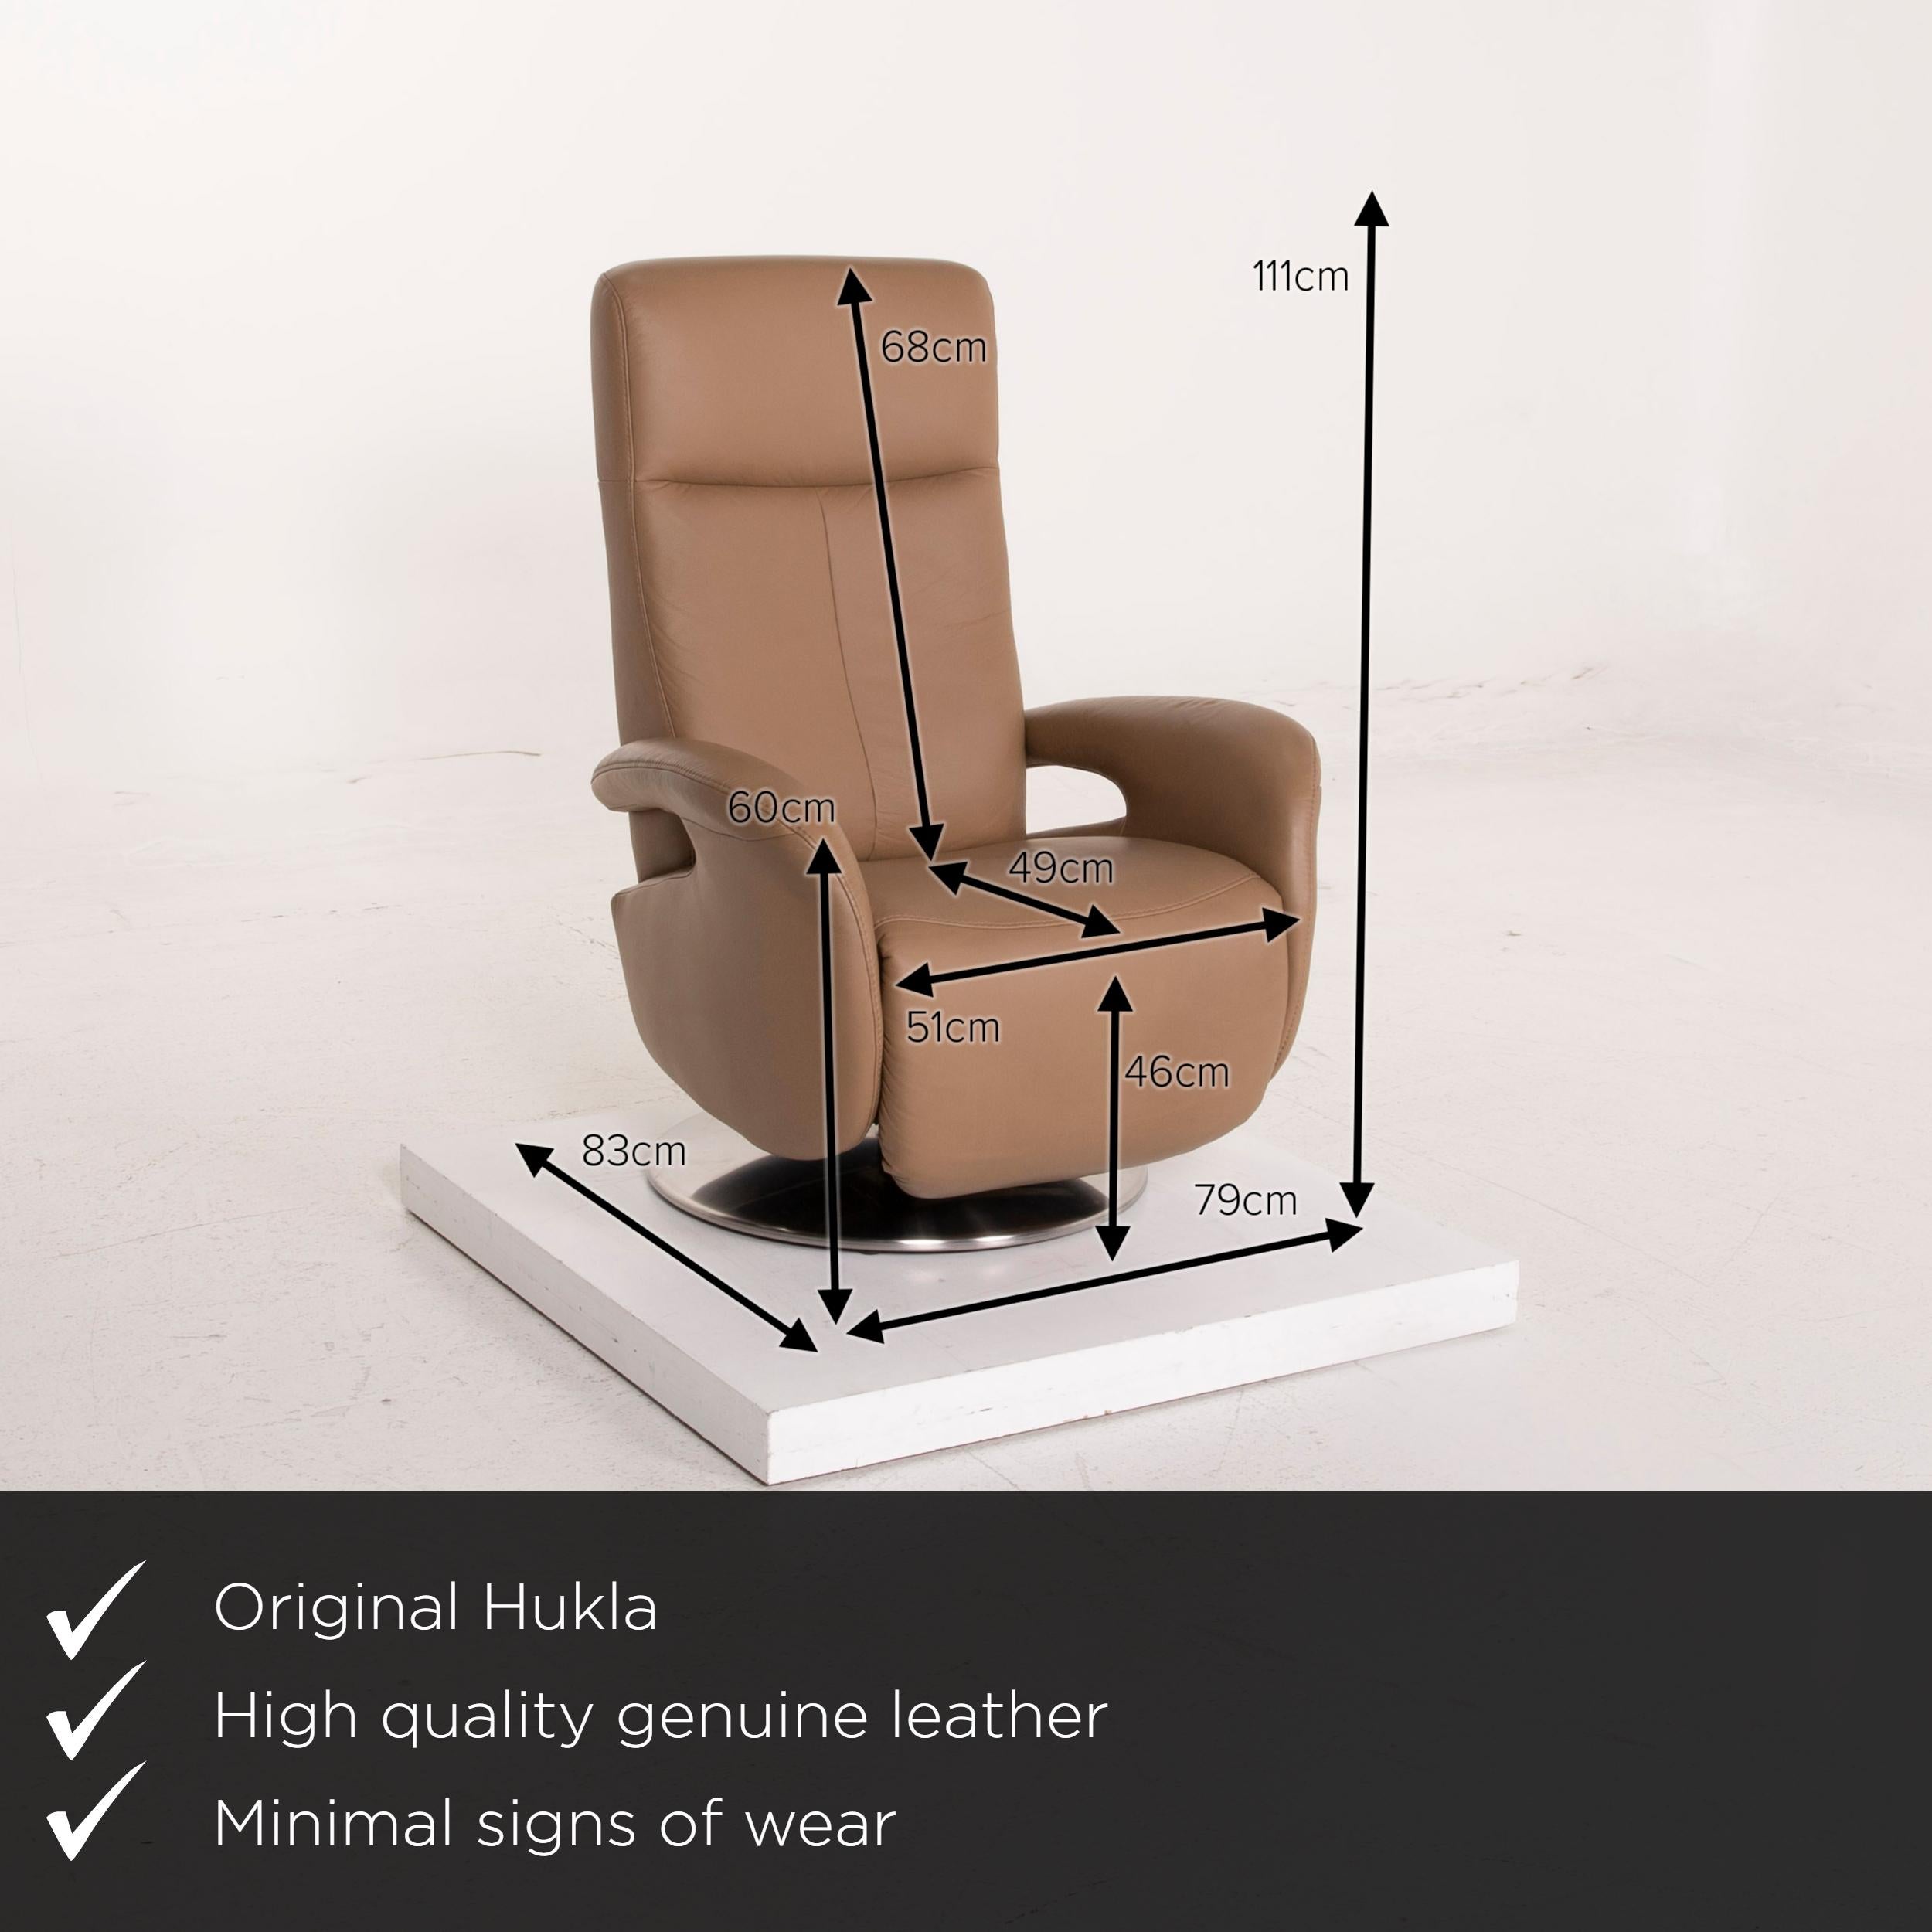 We present to you a Hukla leather armchair beige relax function.
 

 Product measurements in centimeters:
 

Depth 83
Width 79
Height 111
Seat height 46
Rest height 60
Seat depth 49
Seat width 51
Back height 68.

 